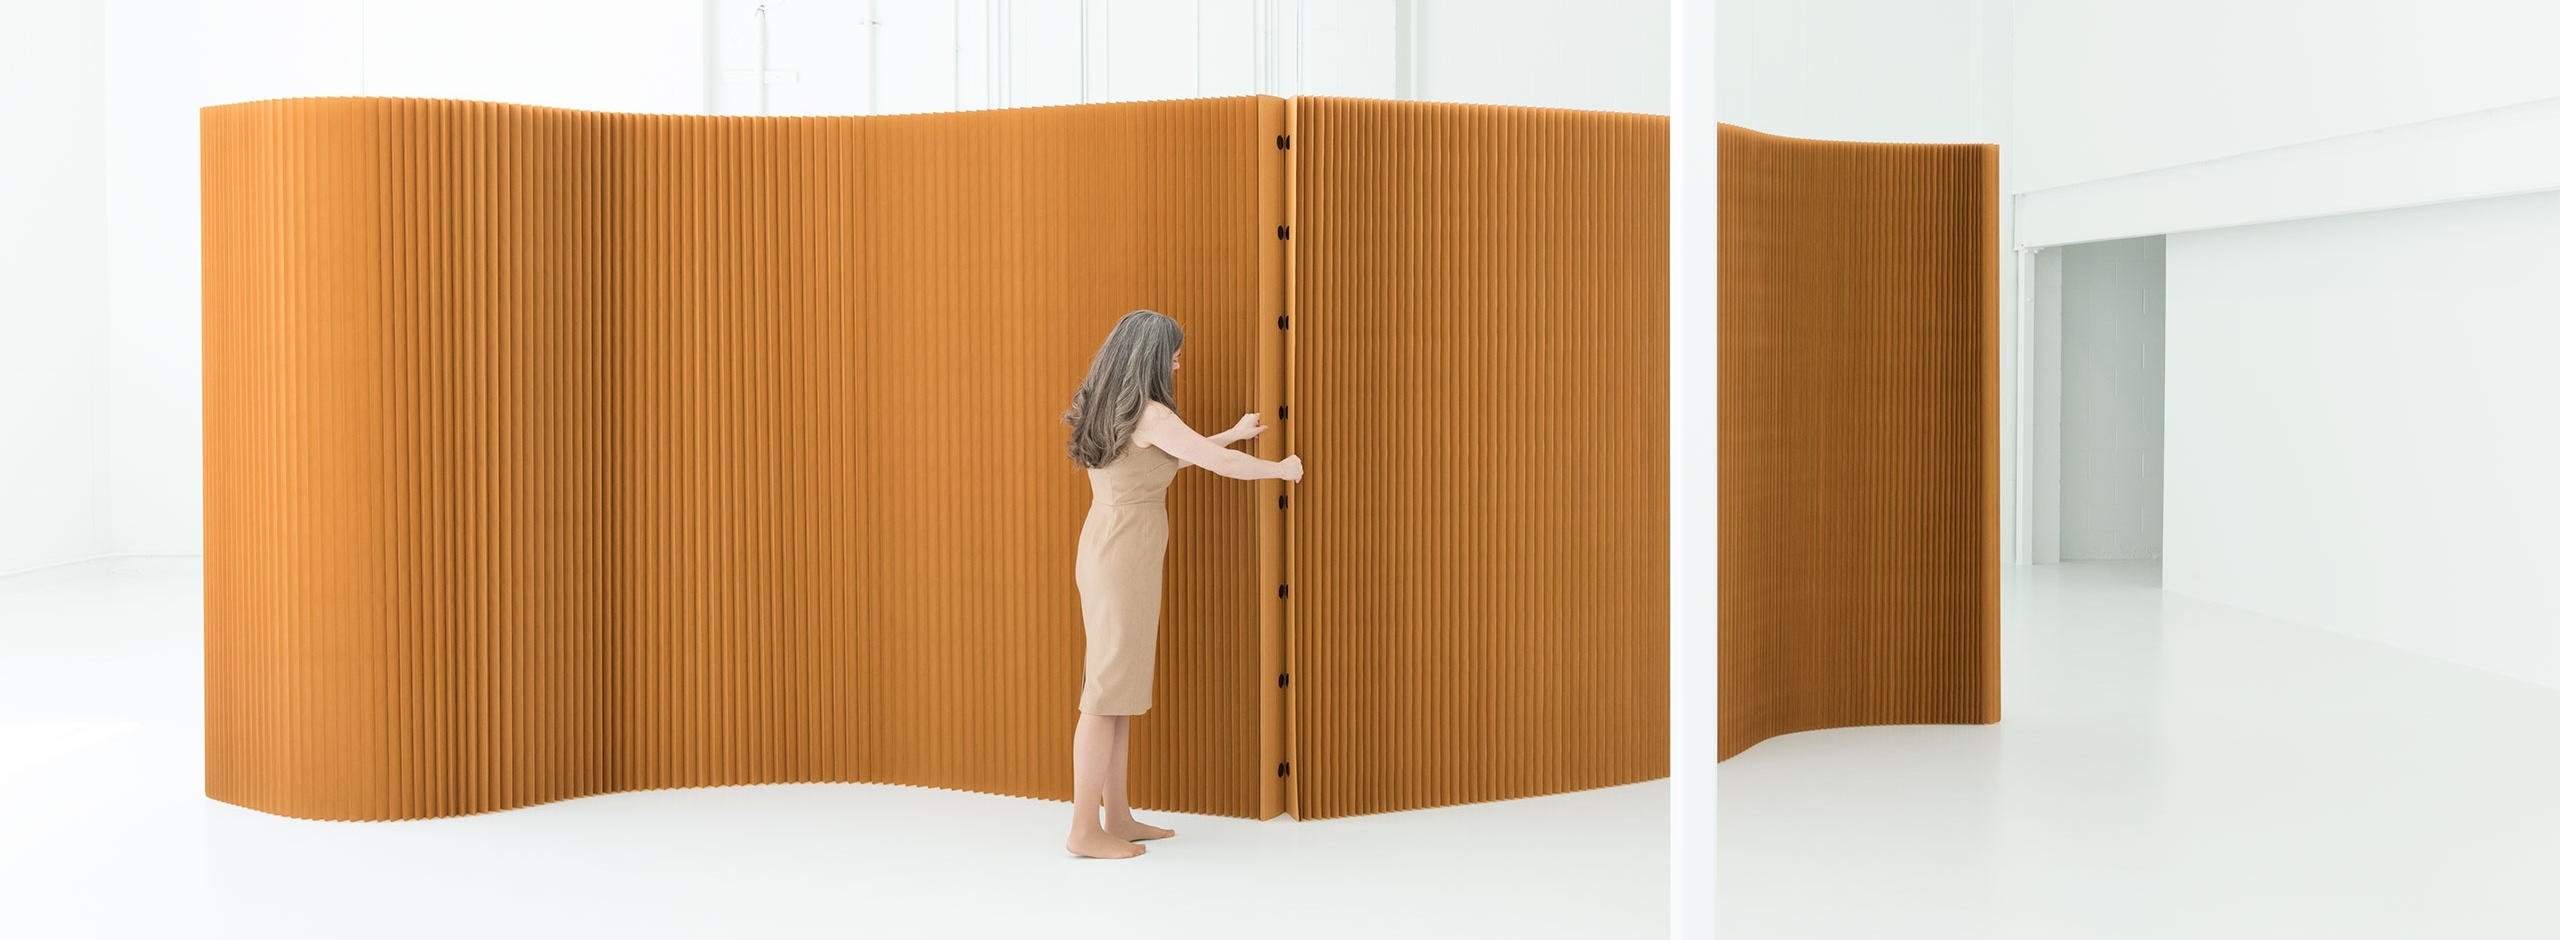 Using the magnetic end panels to create a modular partition system.